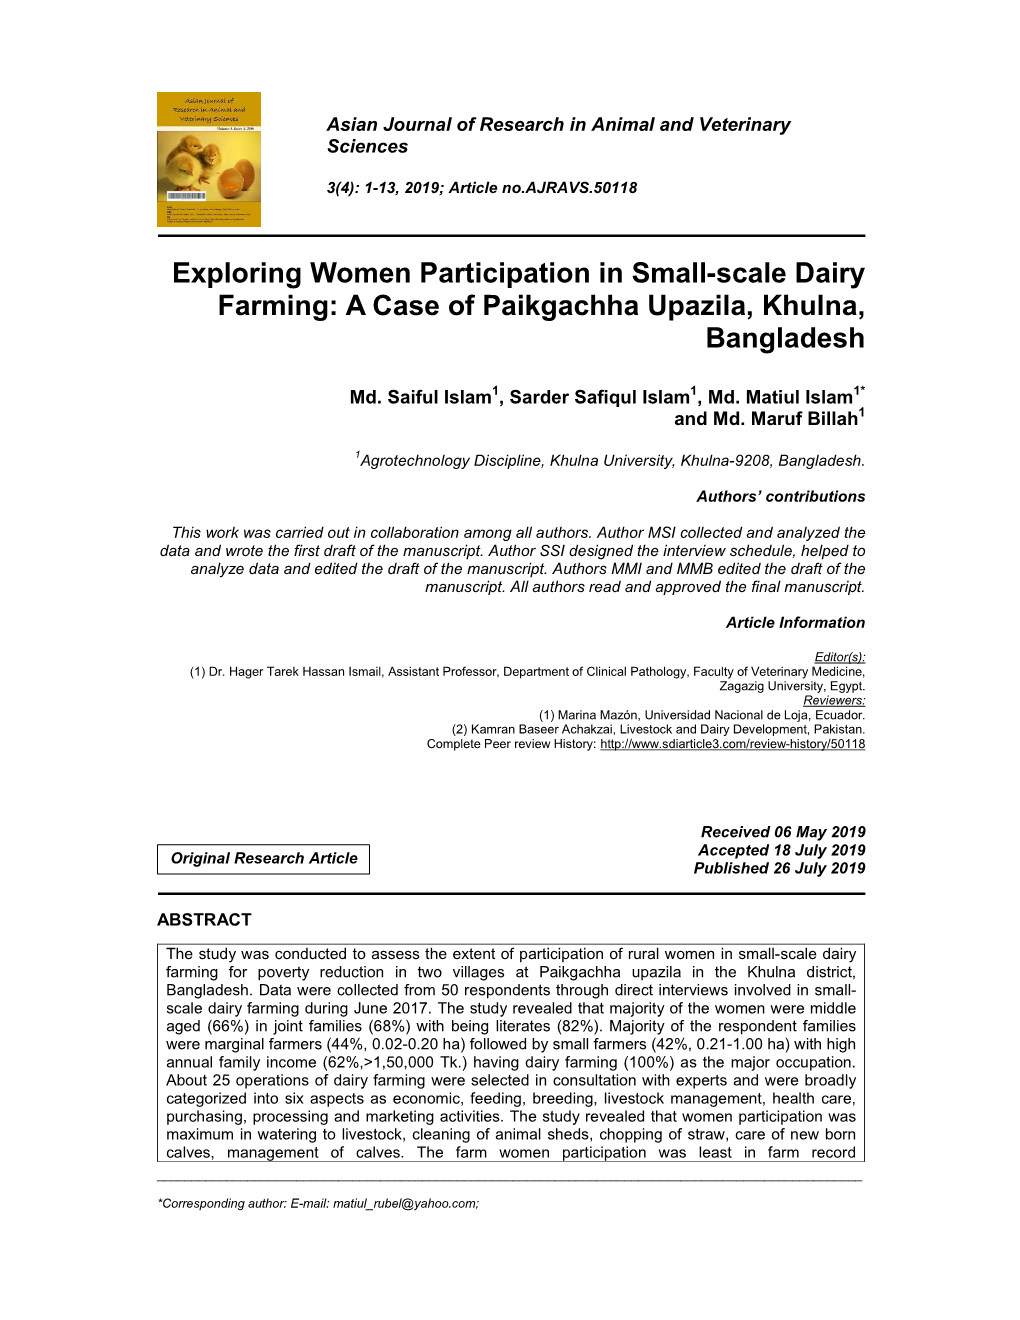 Exploring Women Participation in Small-Scale Dairy Farming: a Case of Paikgachha Upazila, Khulna, Bangladesh